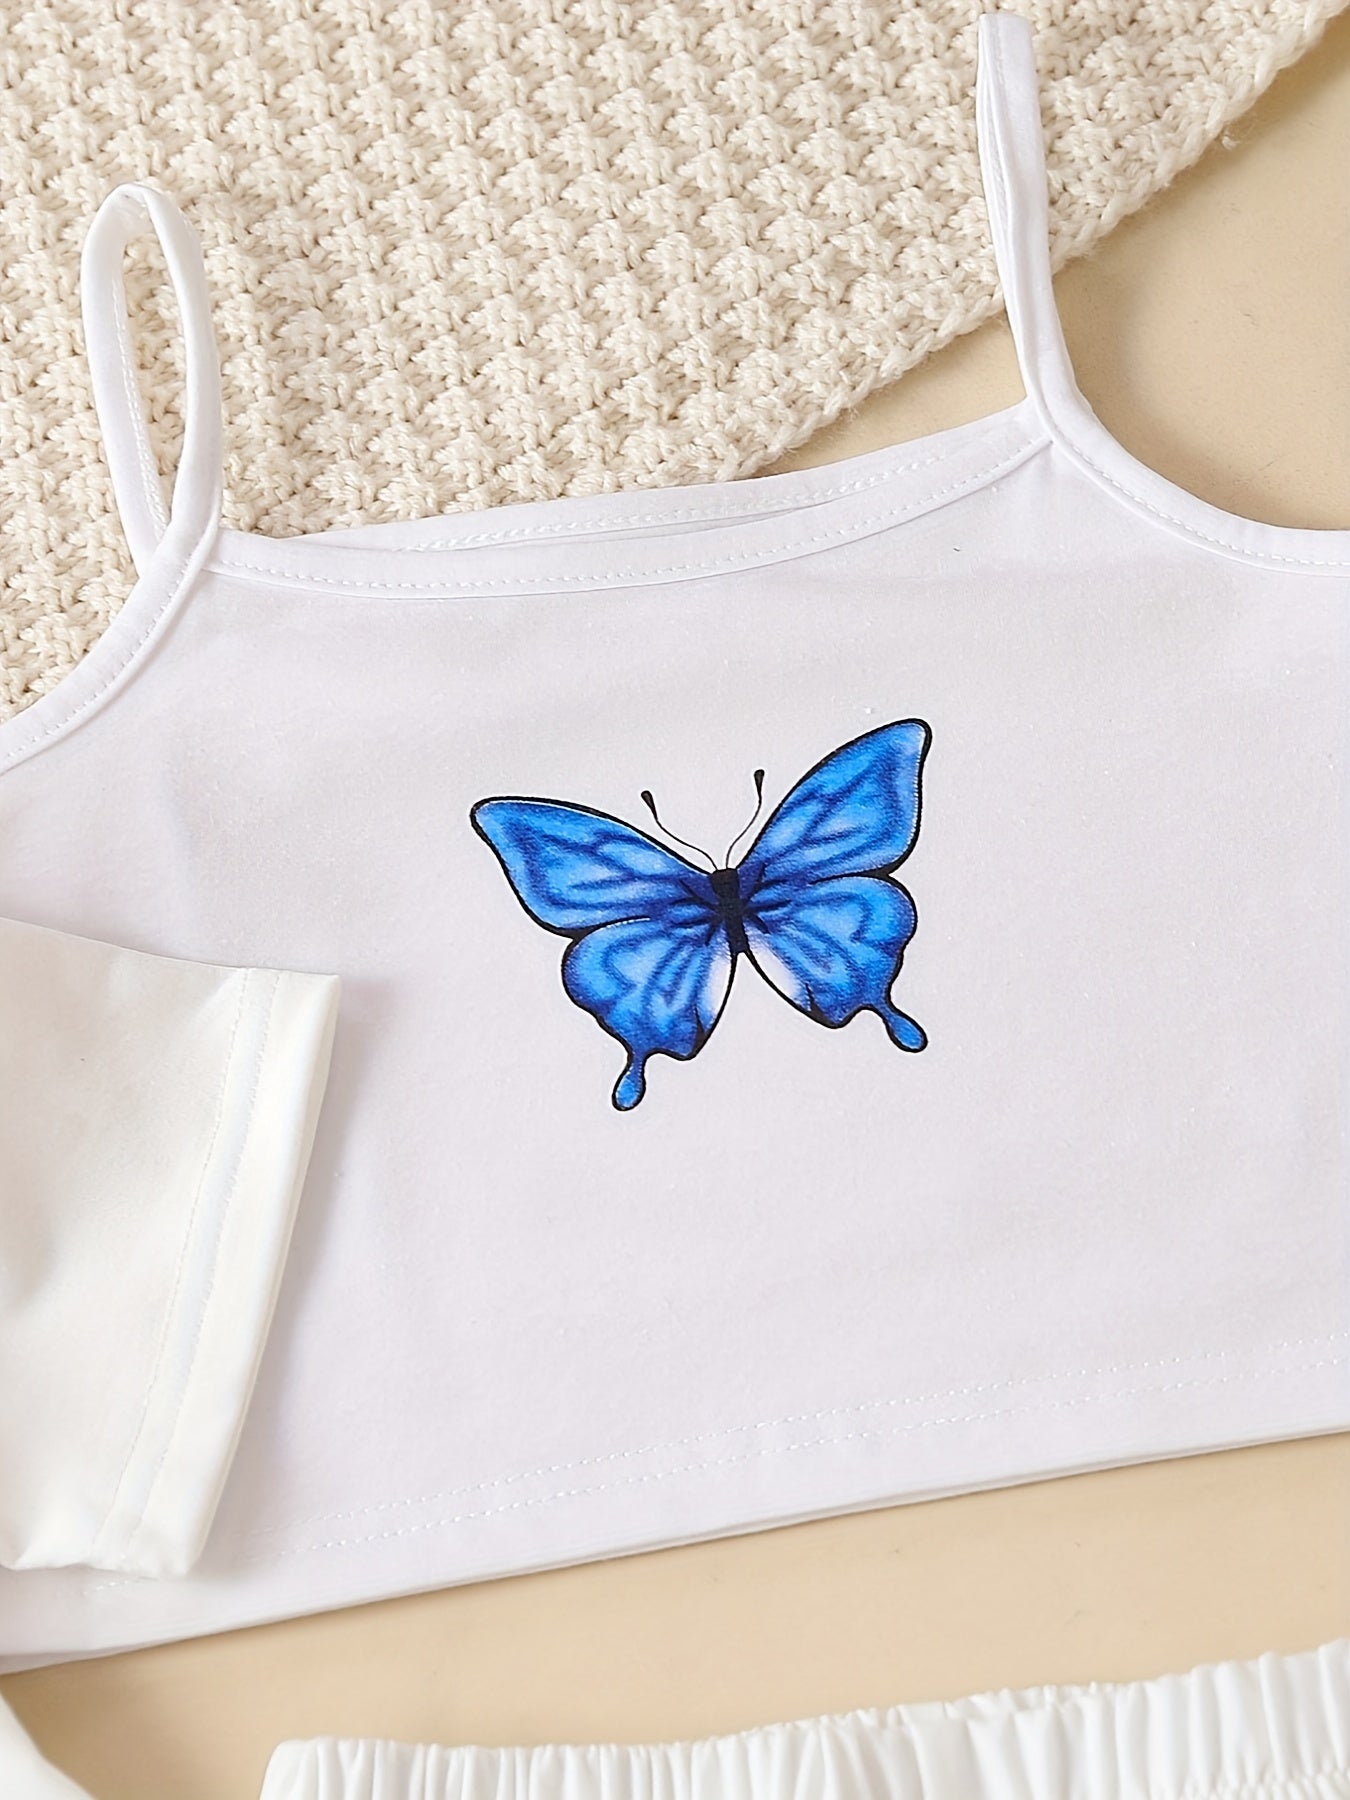 Girls' 3pcs Butterfly Graphic Casual Suit:  Camisole, Short Sleeve T-Shirt Cover Up And Pants Set Kids Sports Leisure Suits Outfit